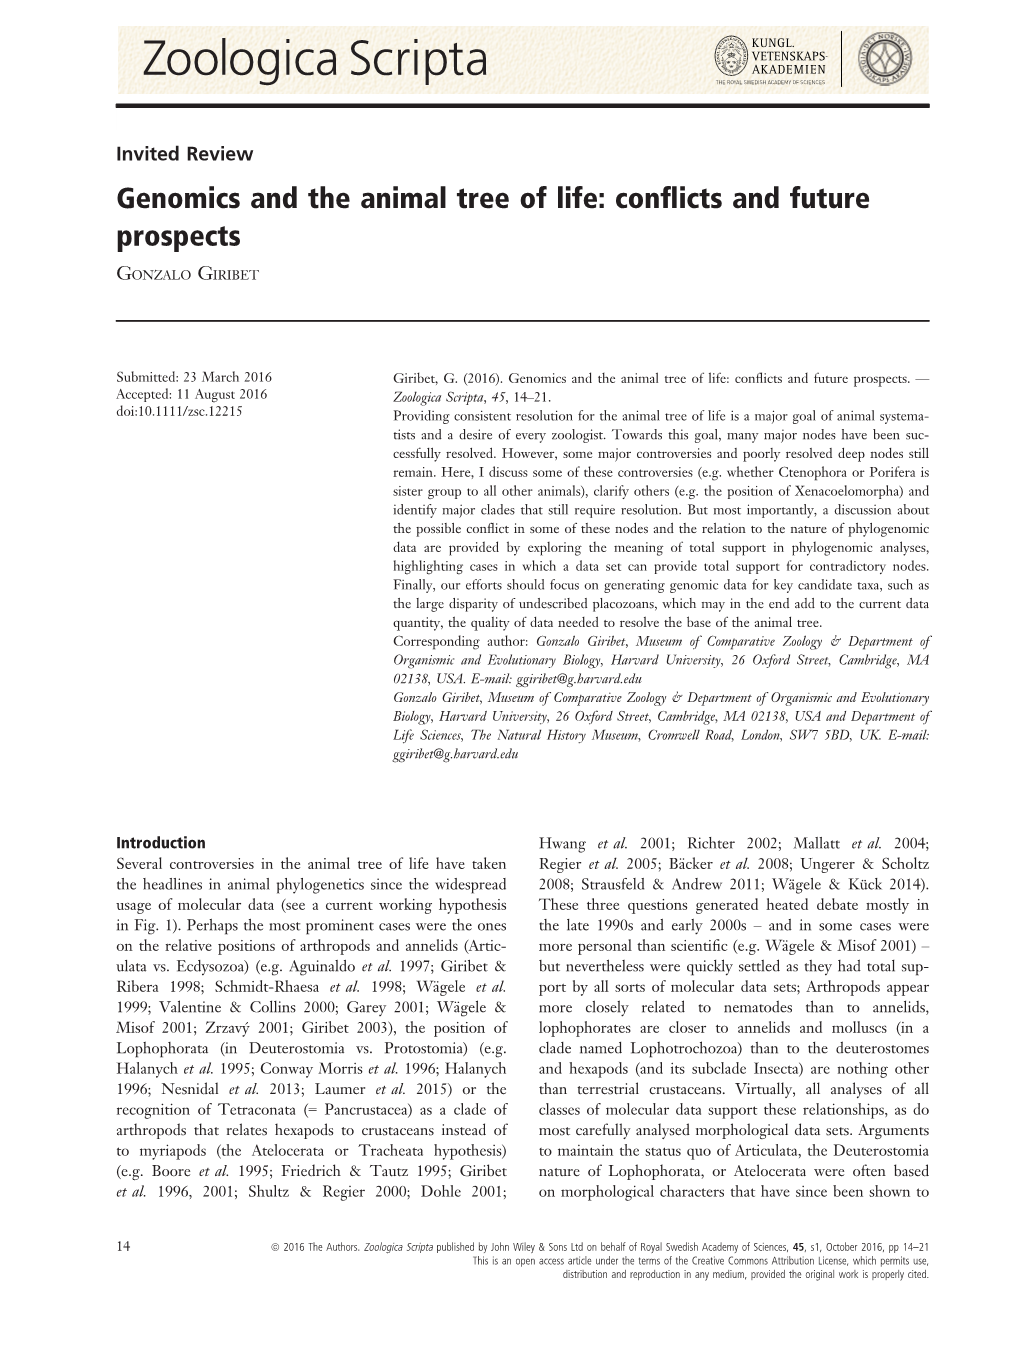 Genomics and the Animal Tree of Life: Conflicts and Future Prospects